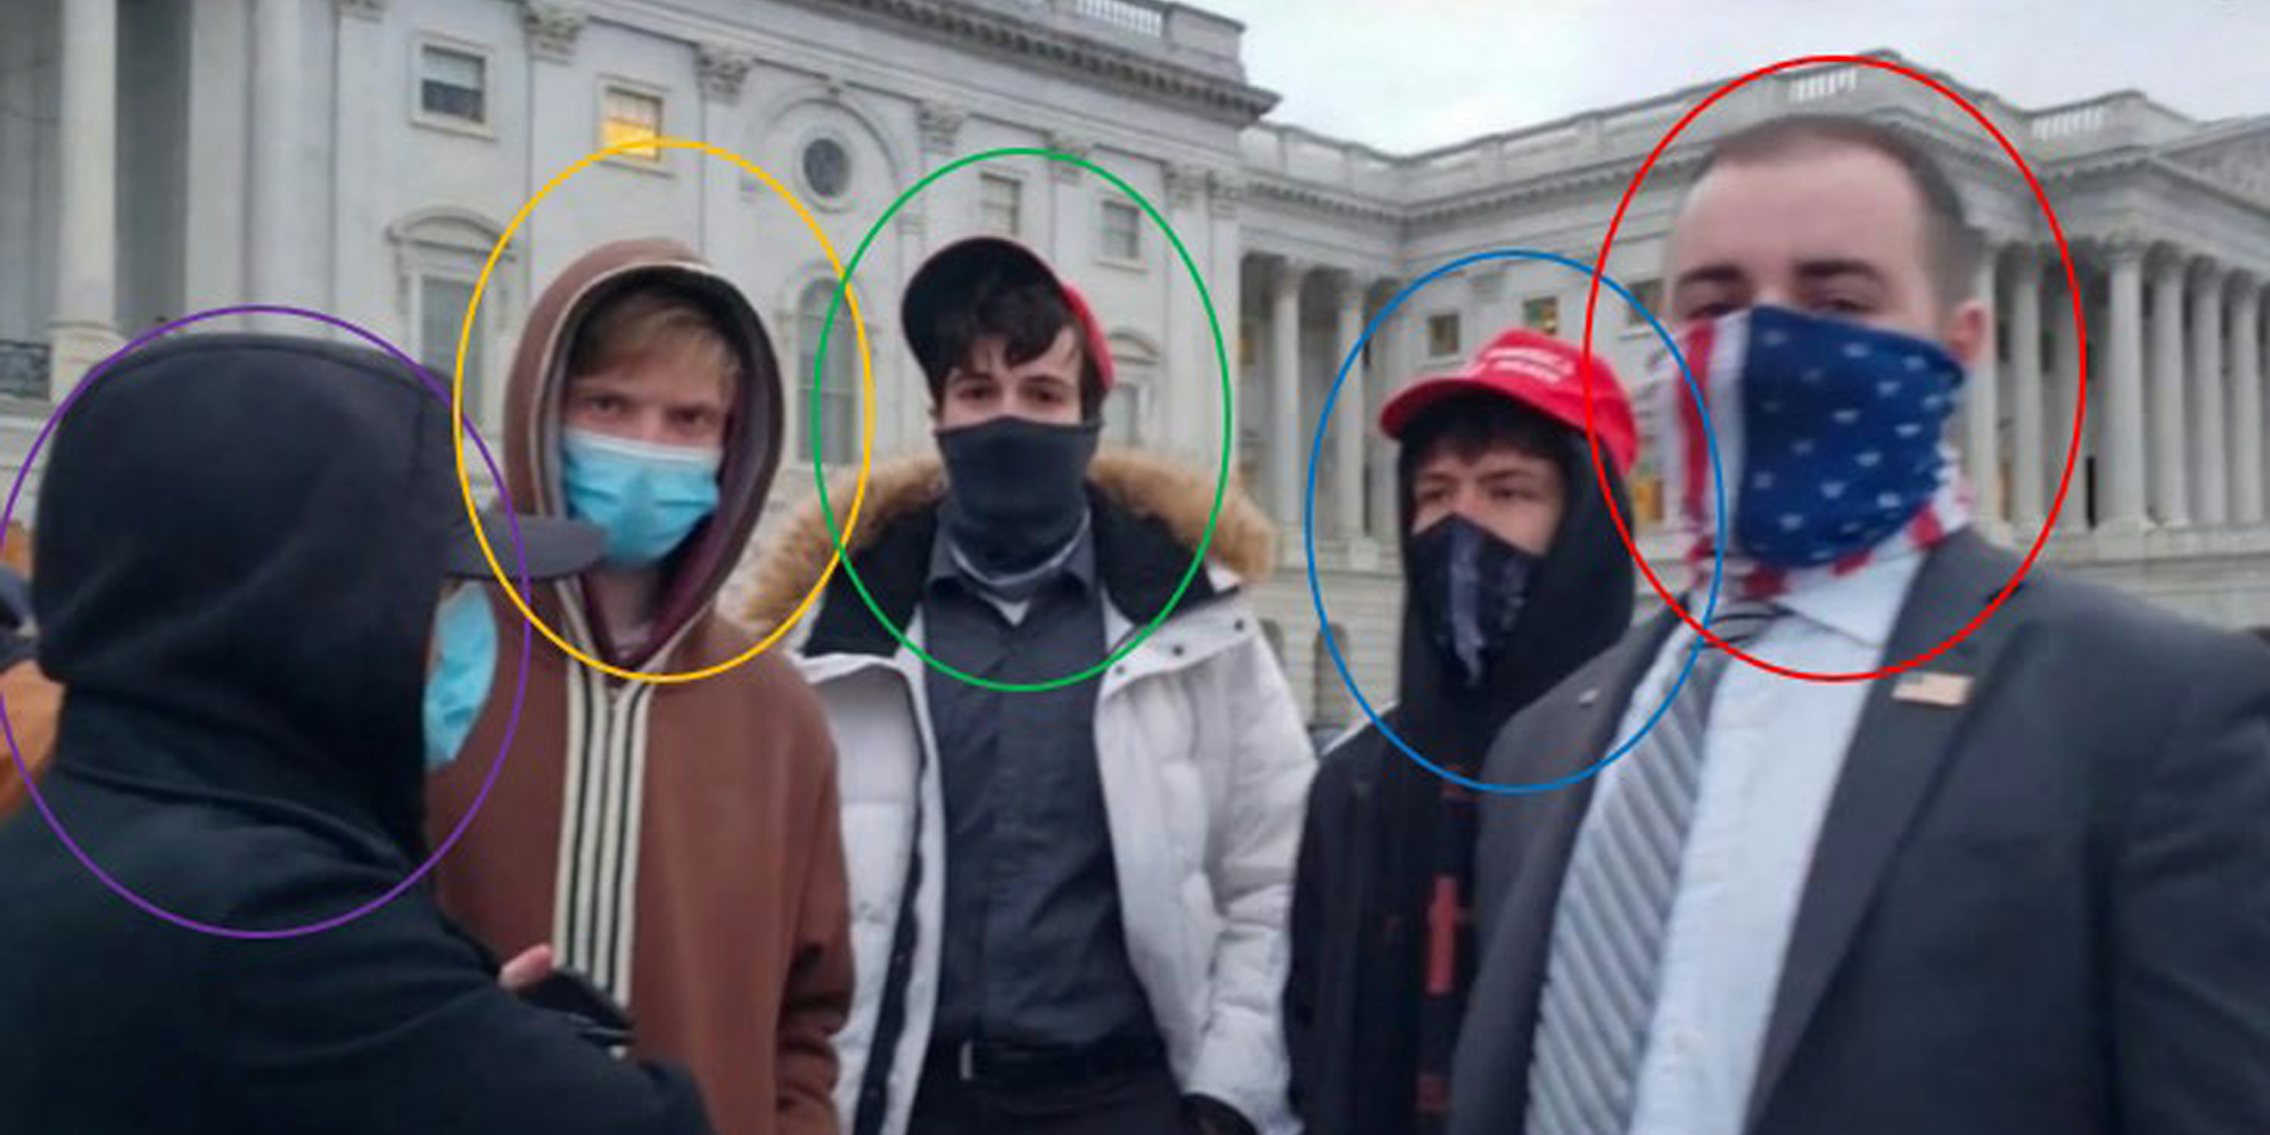 group of men with circled faces including Paul Edwald Lovley circled in orange in front of U.S. Capitol building